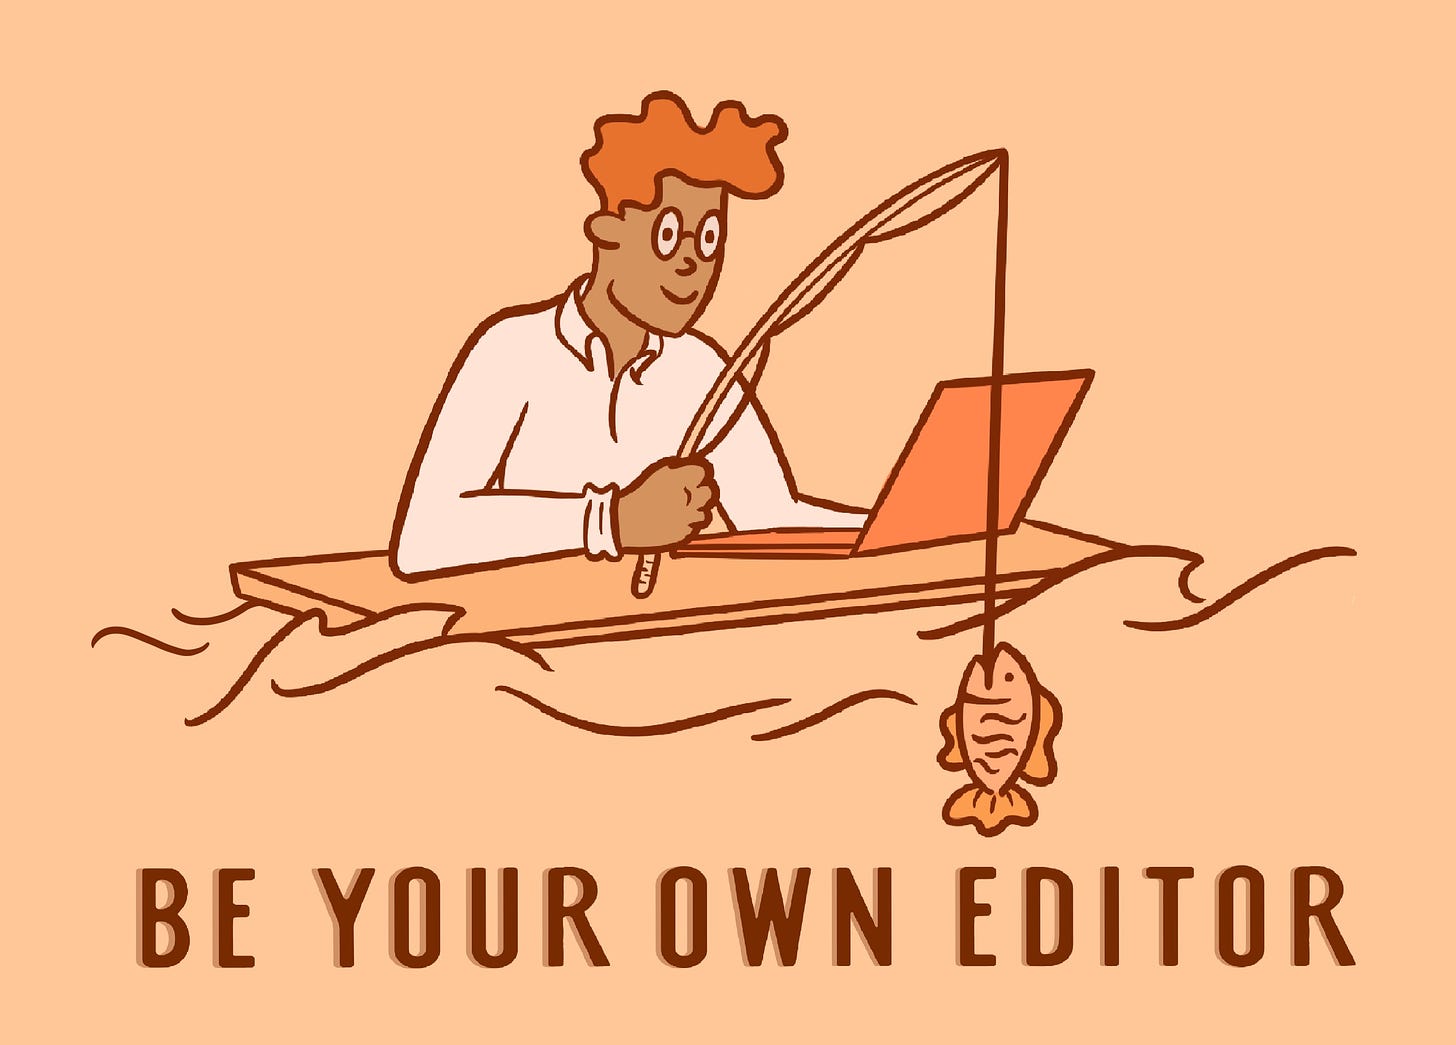 Link to: Be Your Own Editor home page